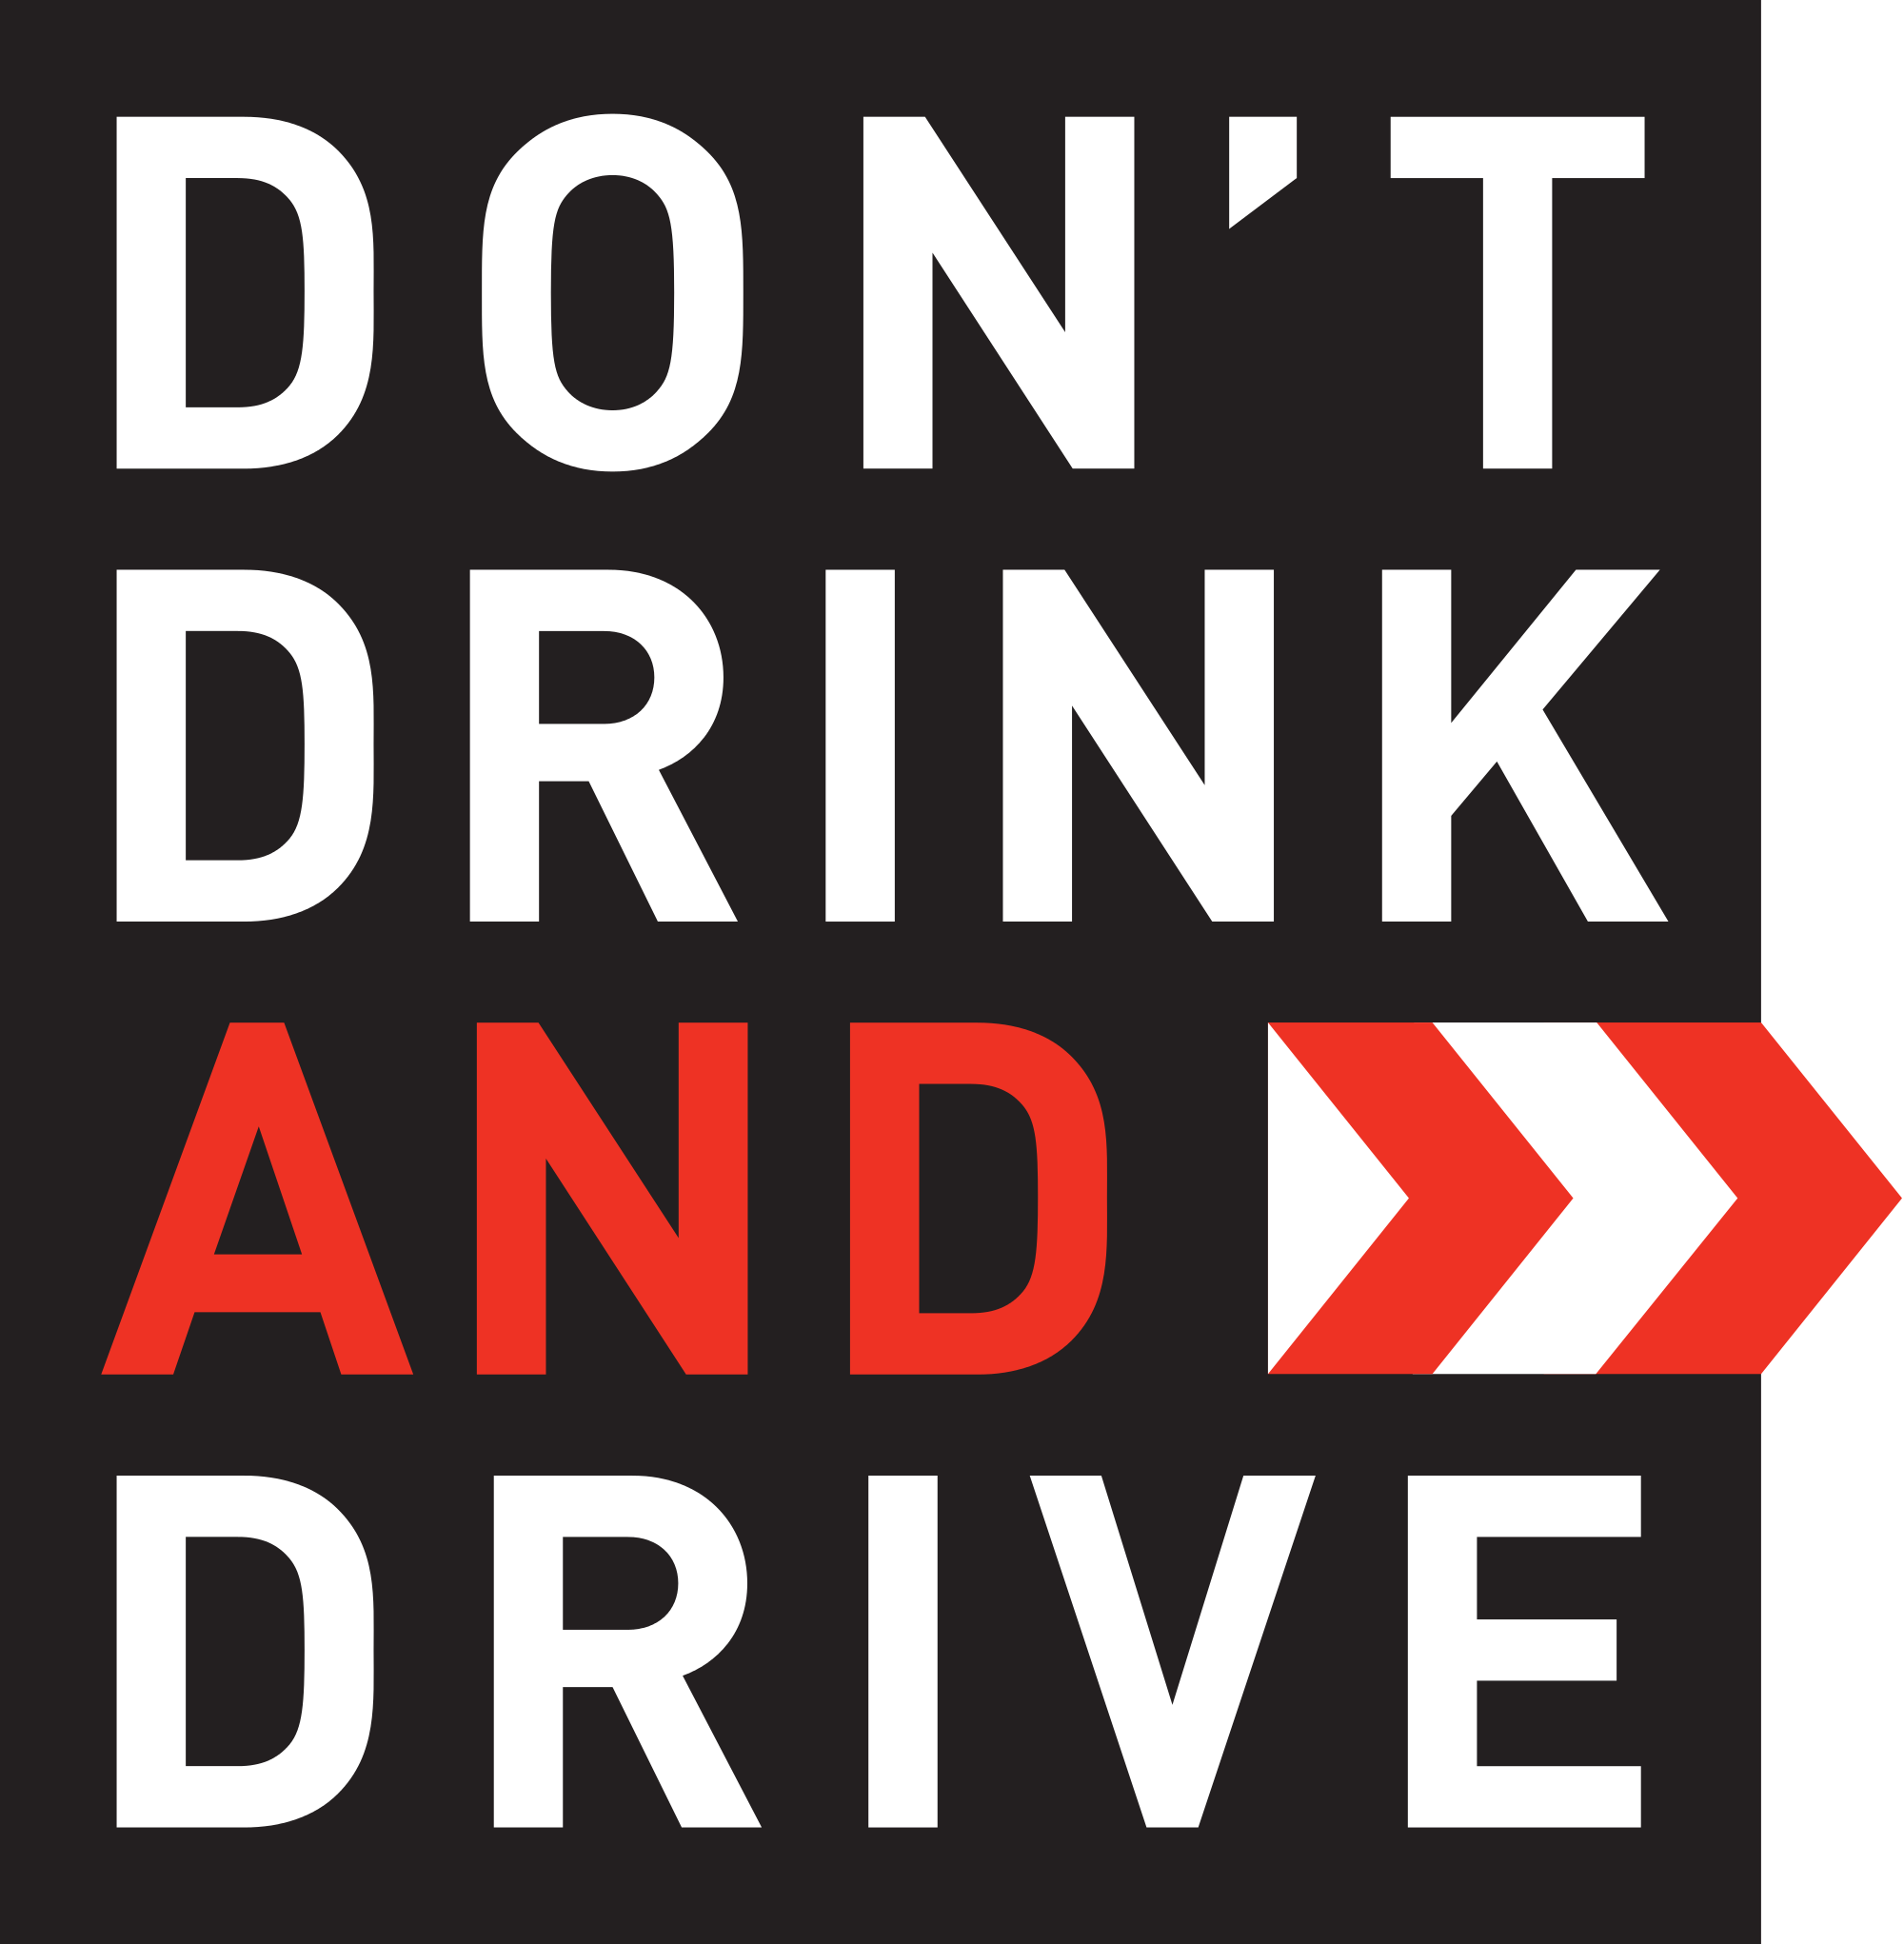 “Lower Drink Drive Limit” say Safety Campaigners